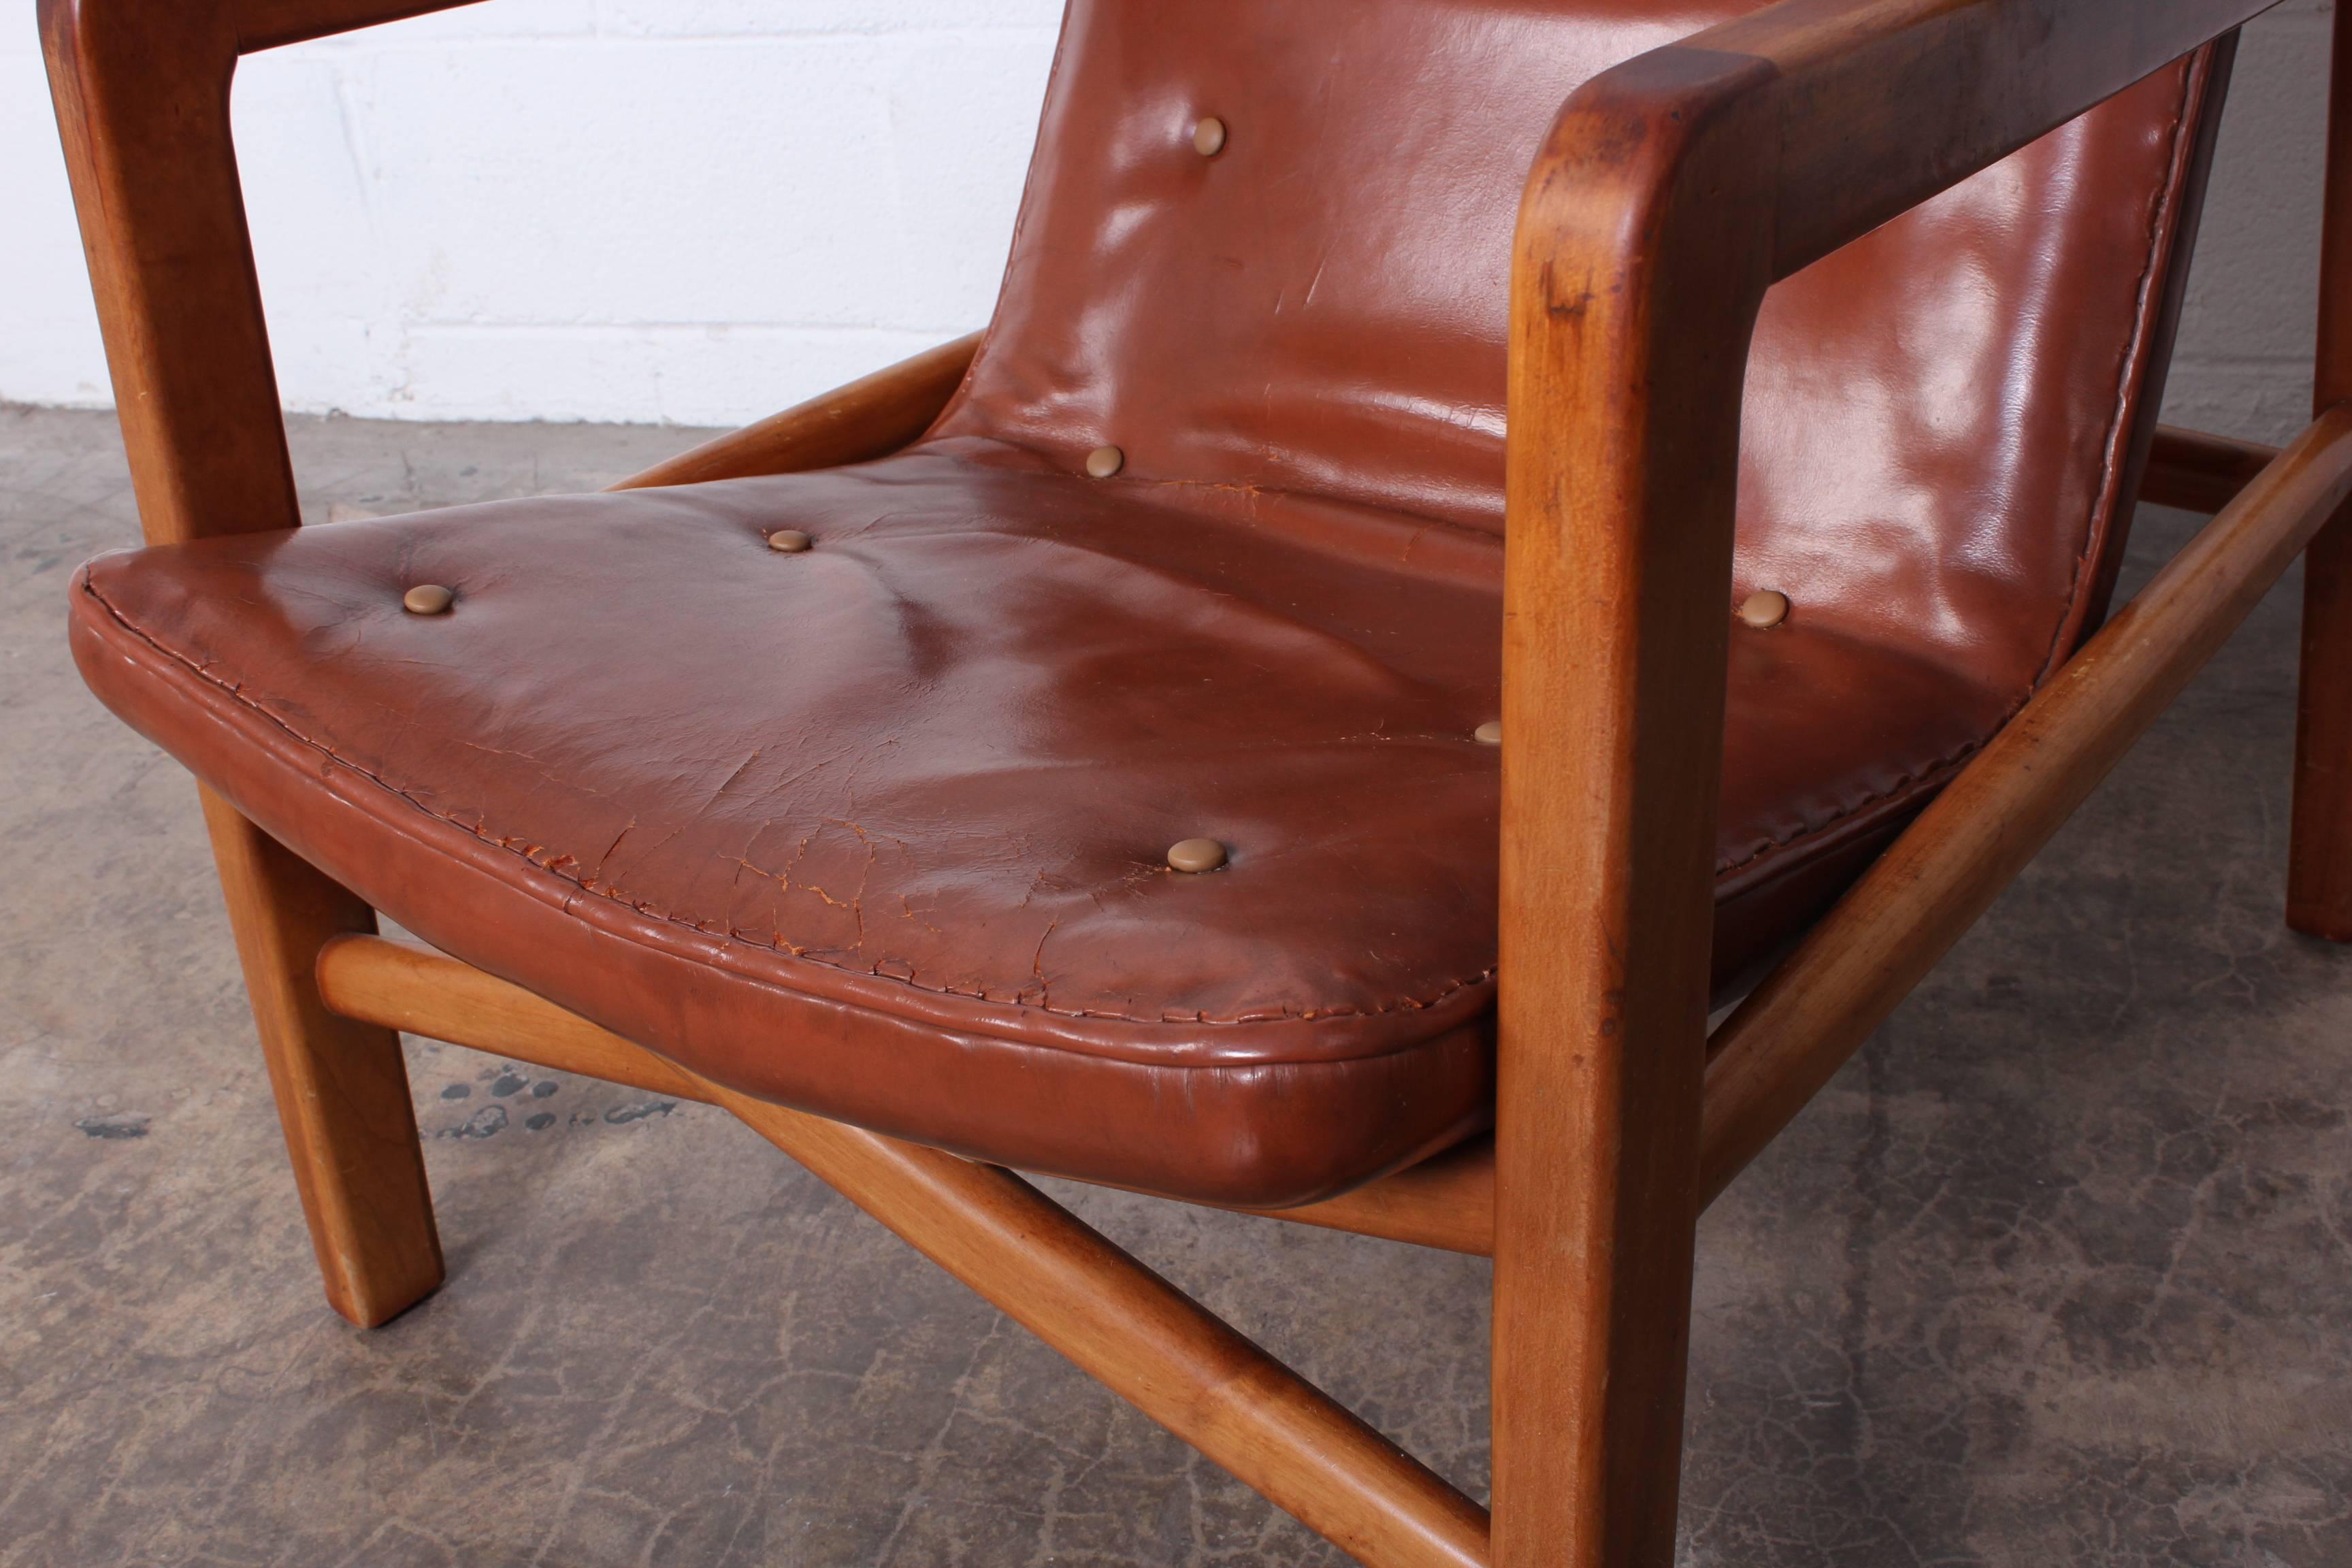 Tove & Edvard Kindt-Larsen 'Fireplace' Lounge Chair in Original Leather 4